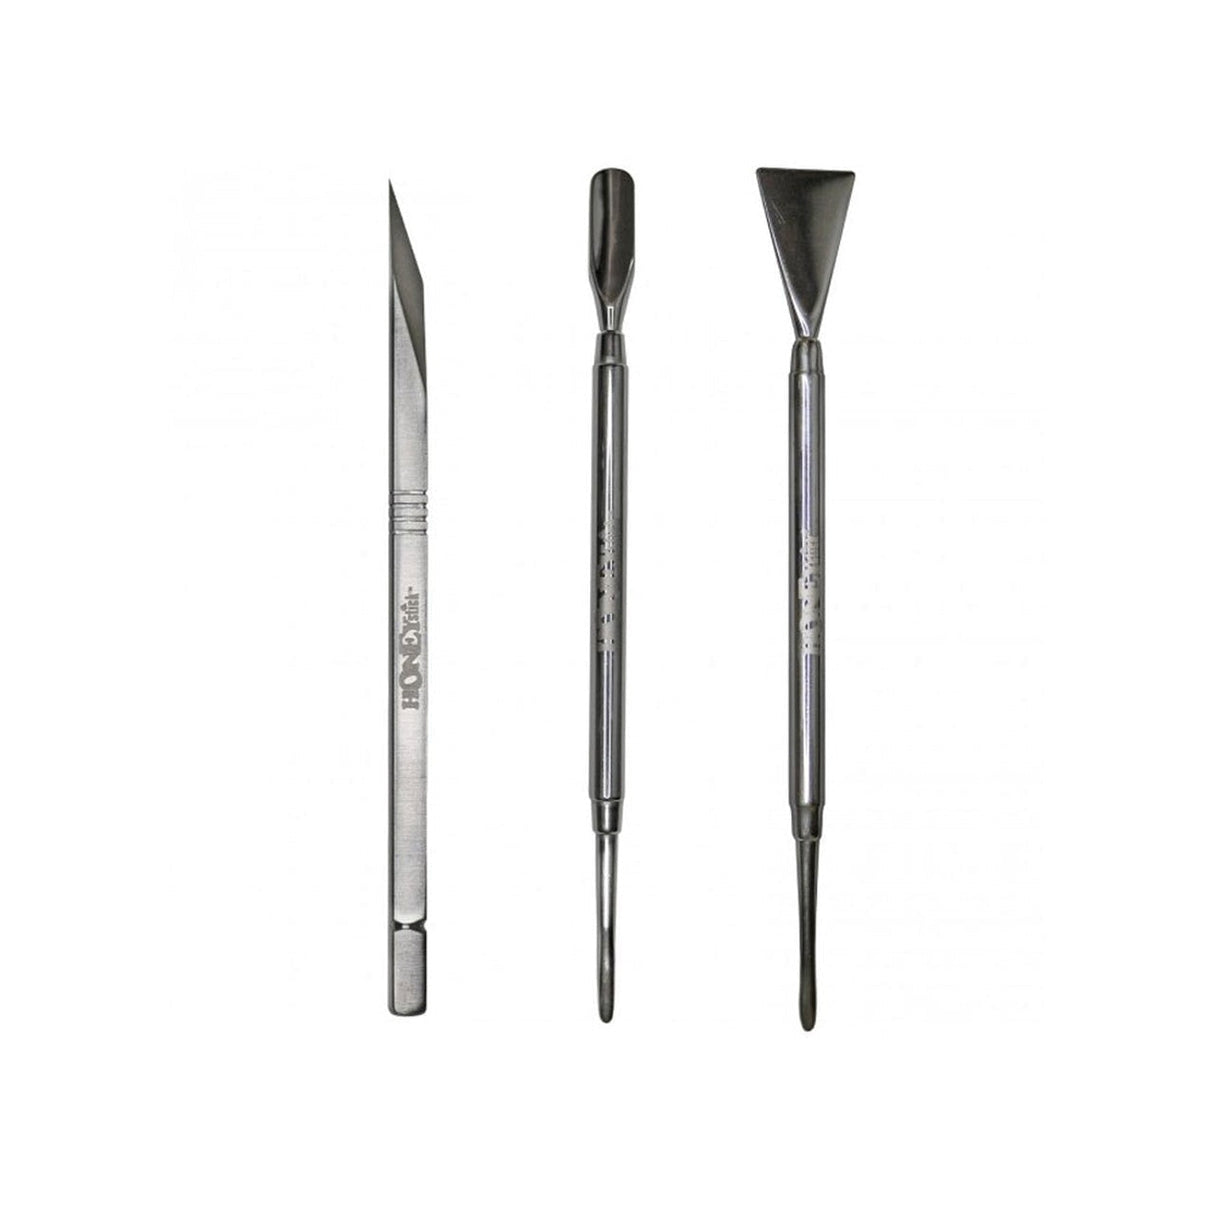 HoneyStick 3-piece Professional Dab Tool Set made of steel, displayed on white background